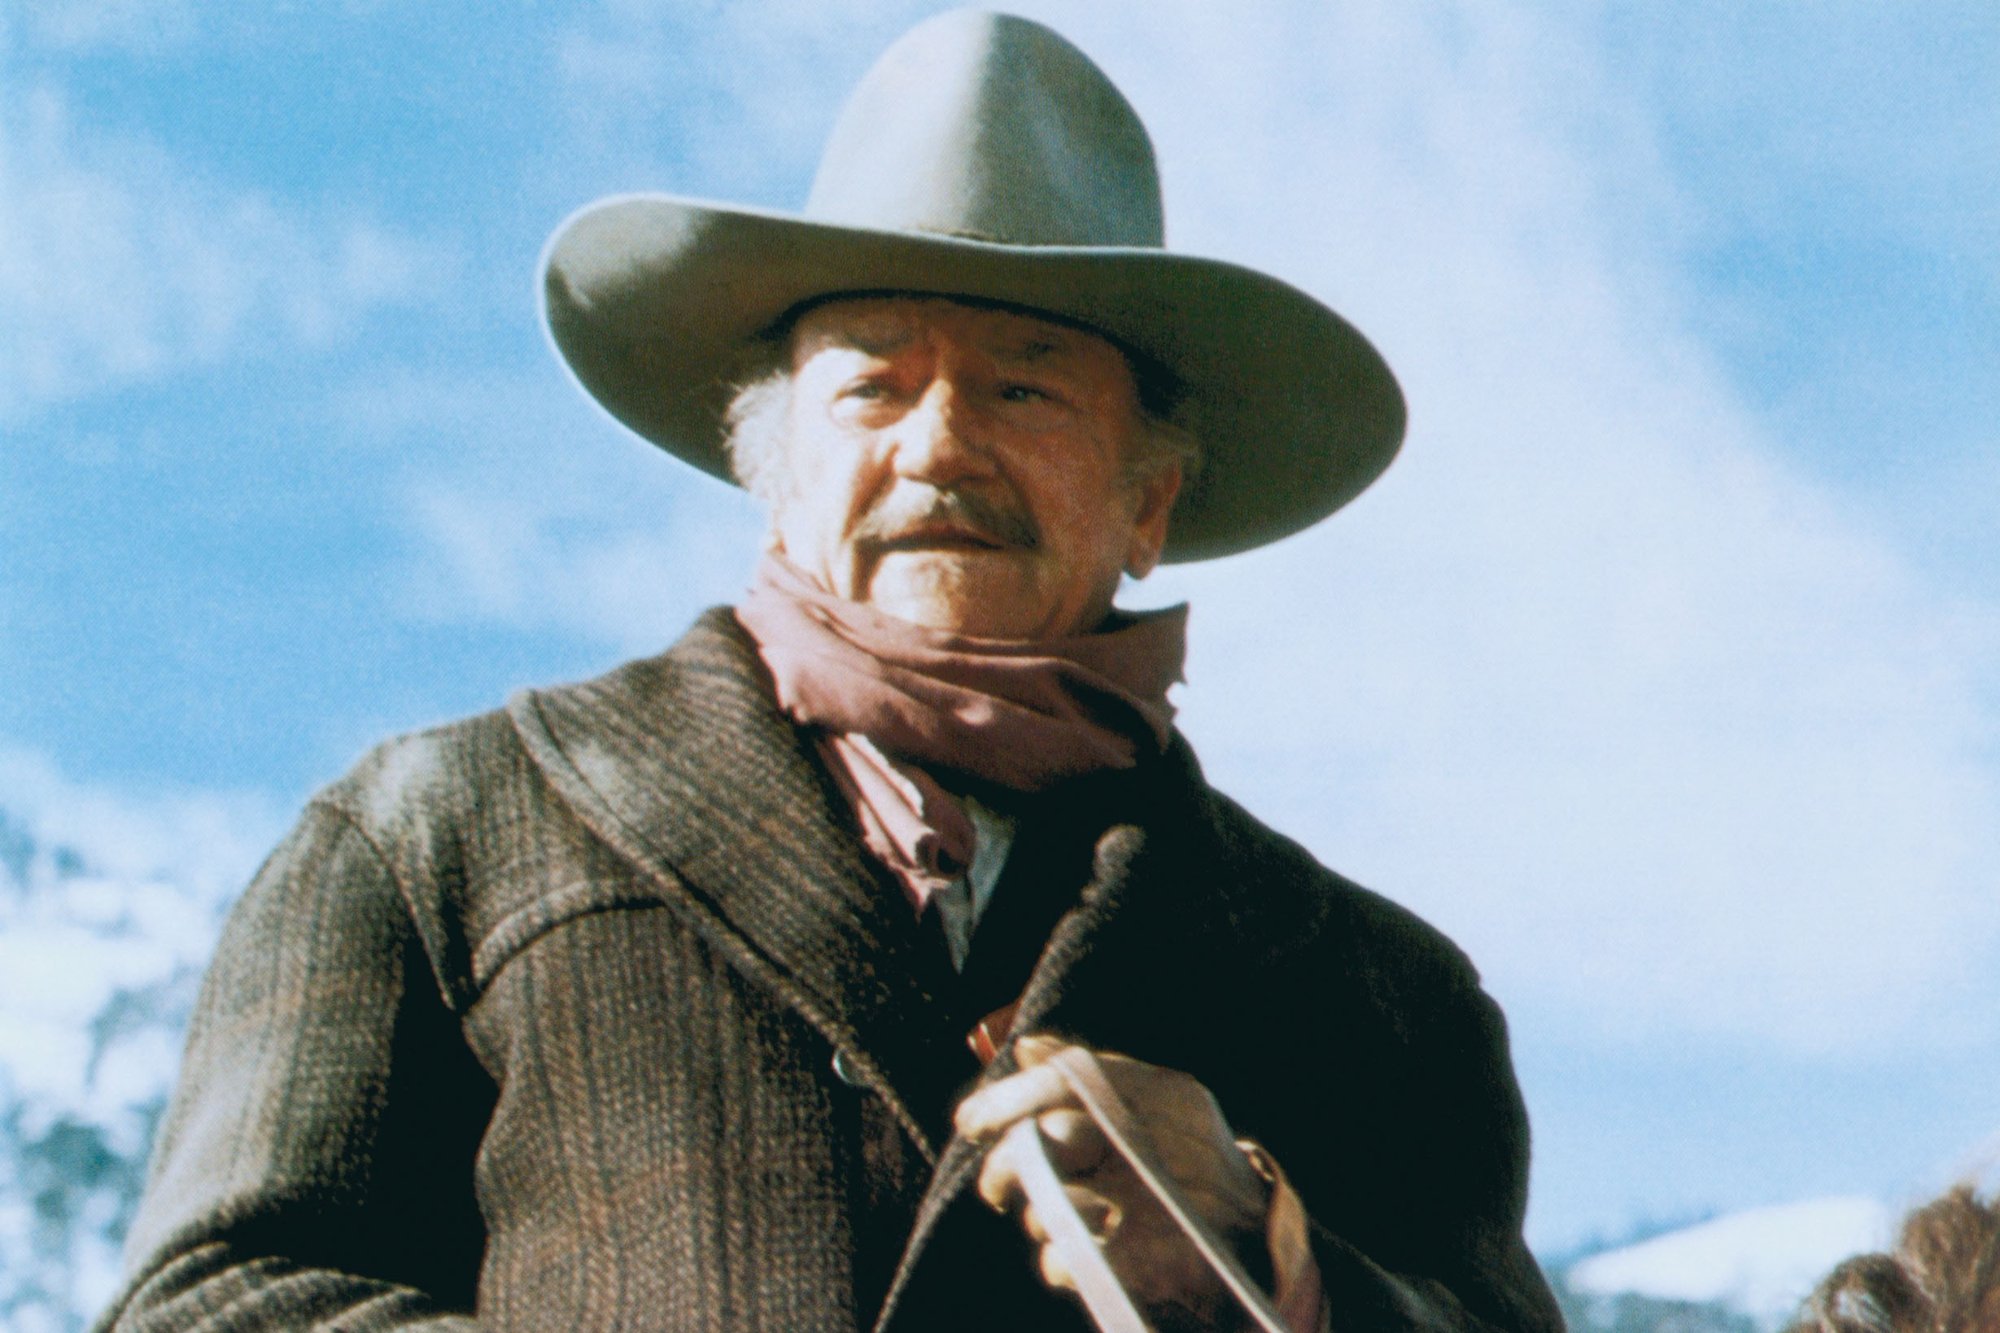 John Wayne in 'The Shootist,' which didn't make money at the box office. He's wearing a Western costume while riding a horse.